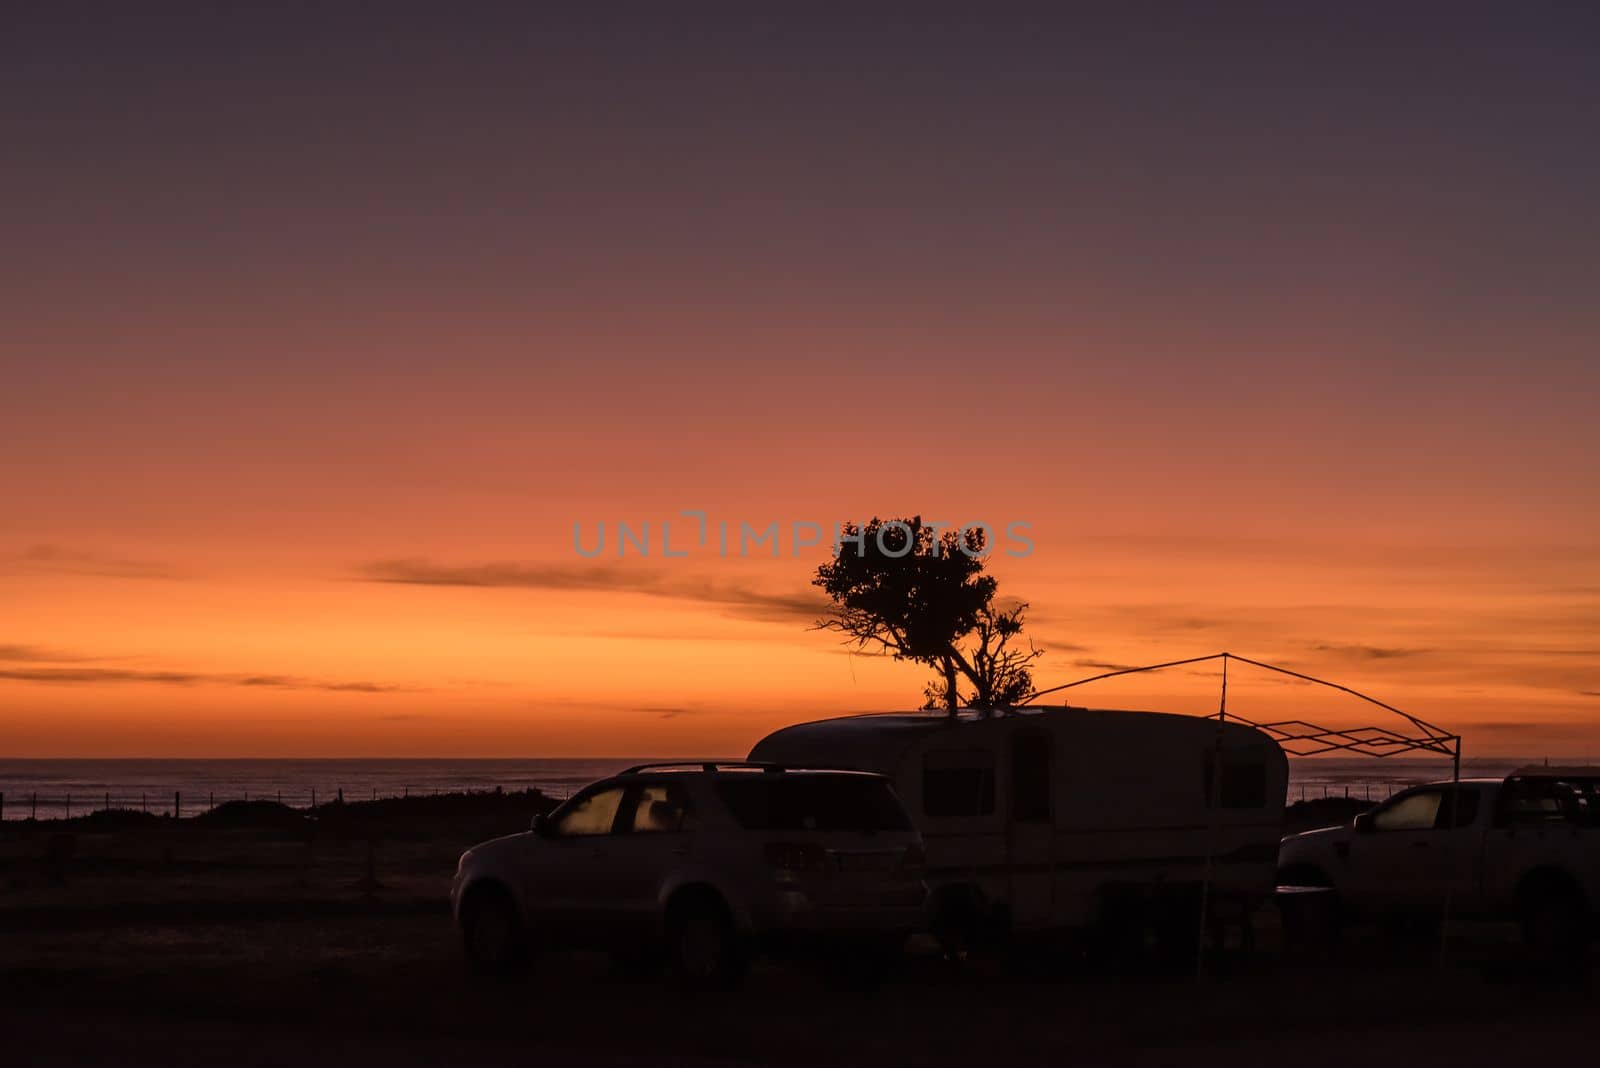 Sunrise at the caravan park in Struisbaai, in the Western Cape Province. Vehicles and a caravan is visible